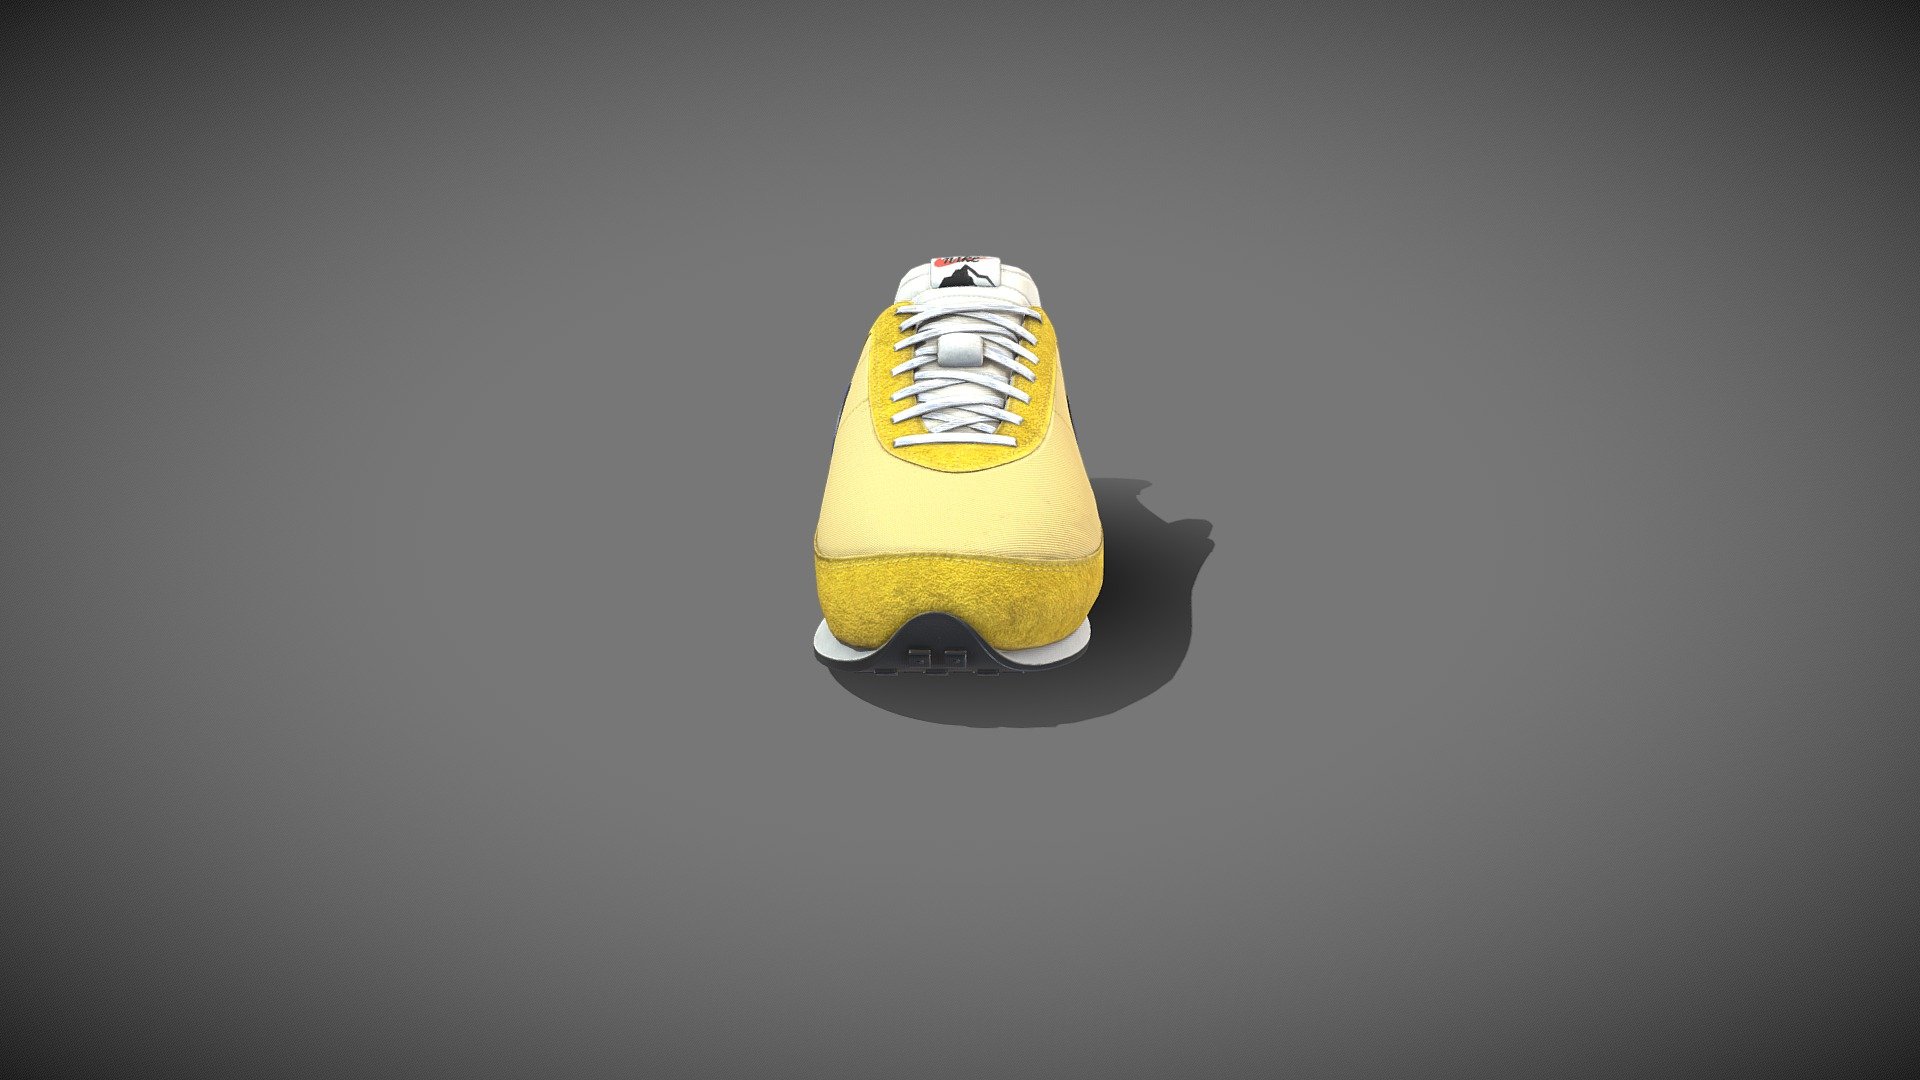 10.582 polycount
4k 1 set - Nike Waffle Trainer 2 SD - 3D model by Dan Shi (@round15) 3d model